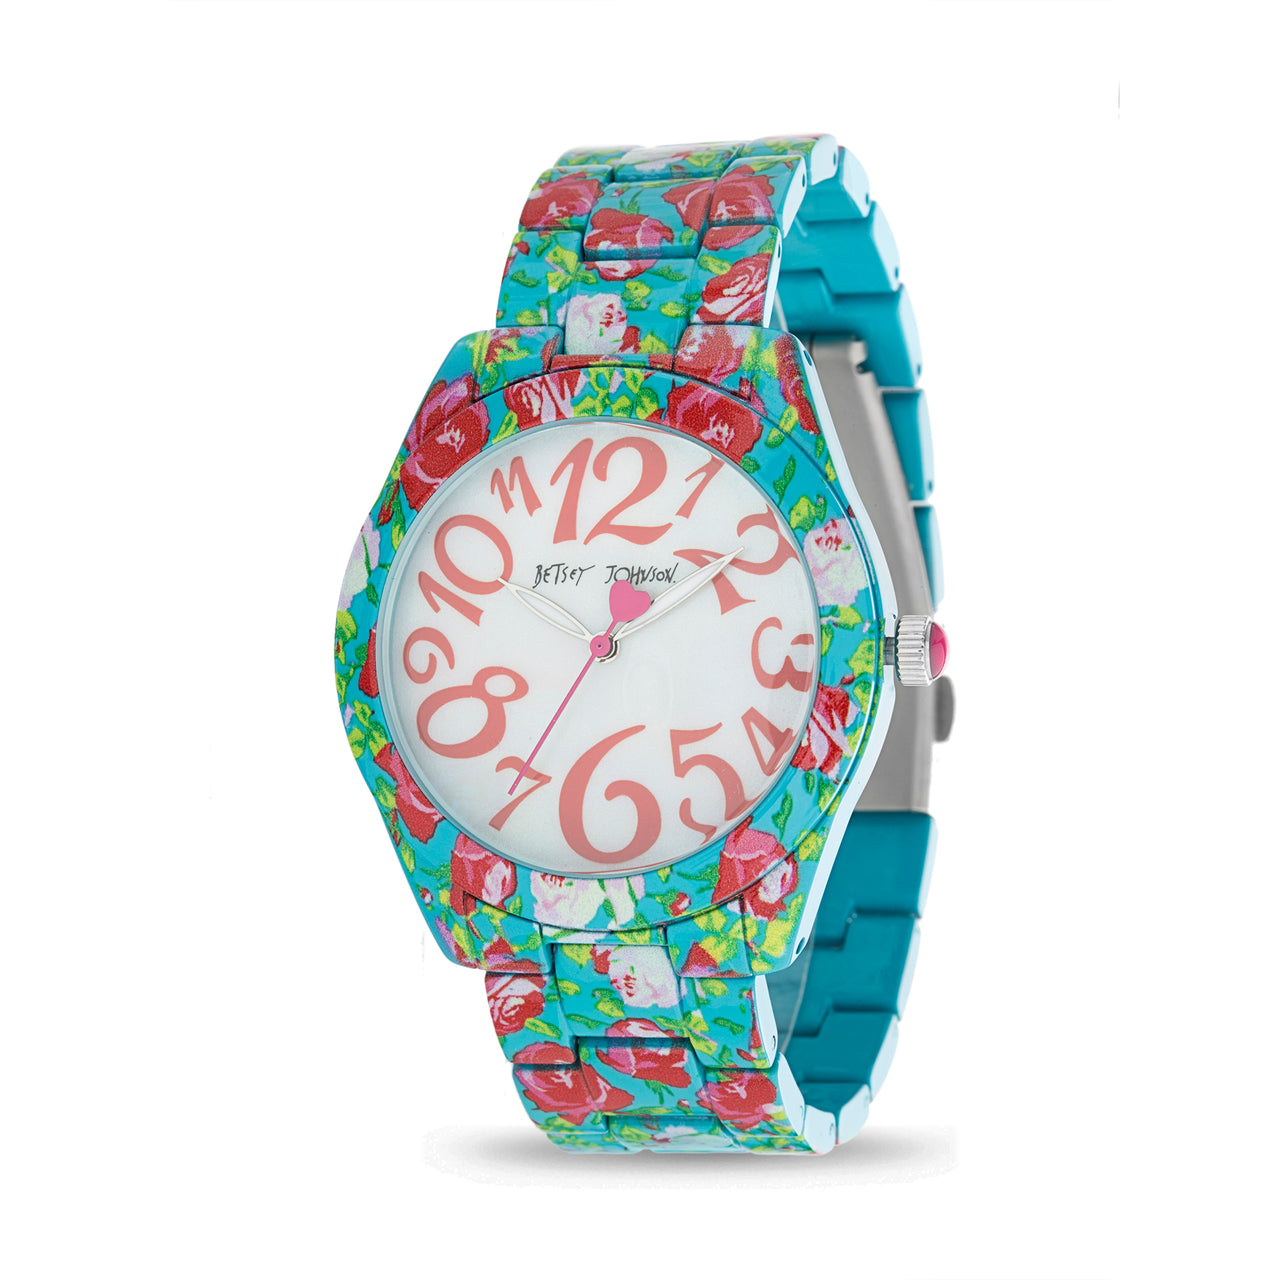 Betsey Johnson Glossy Multi Color Floral Print Case and Link Strap Watch with Mop Dial with Pink Numbers for Women